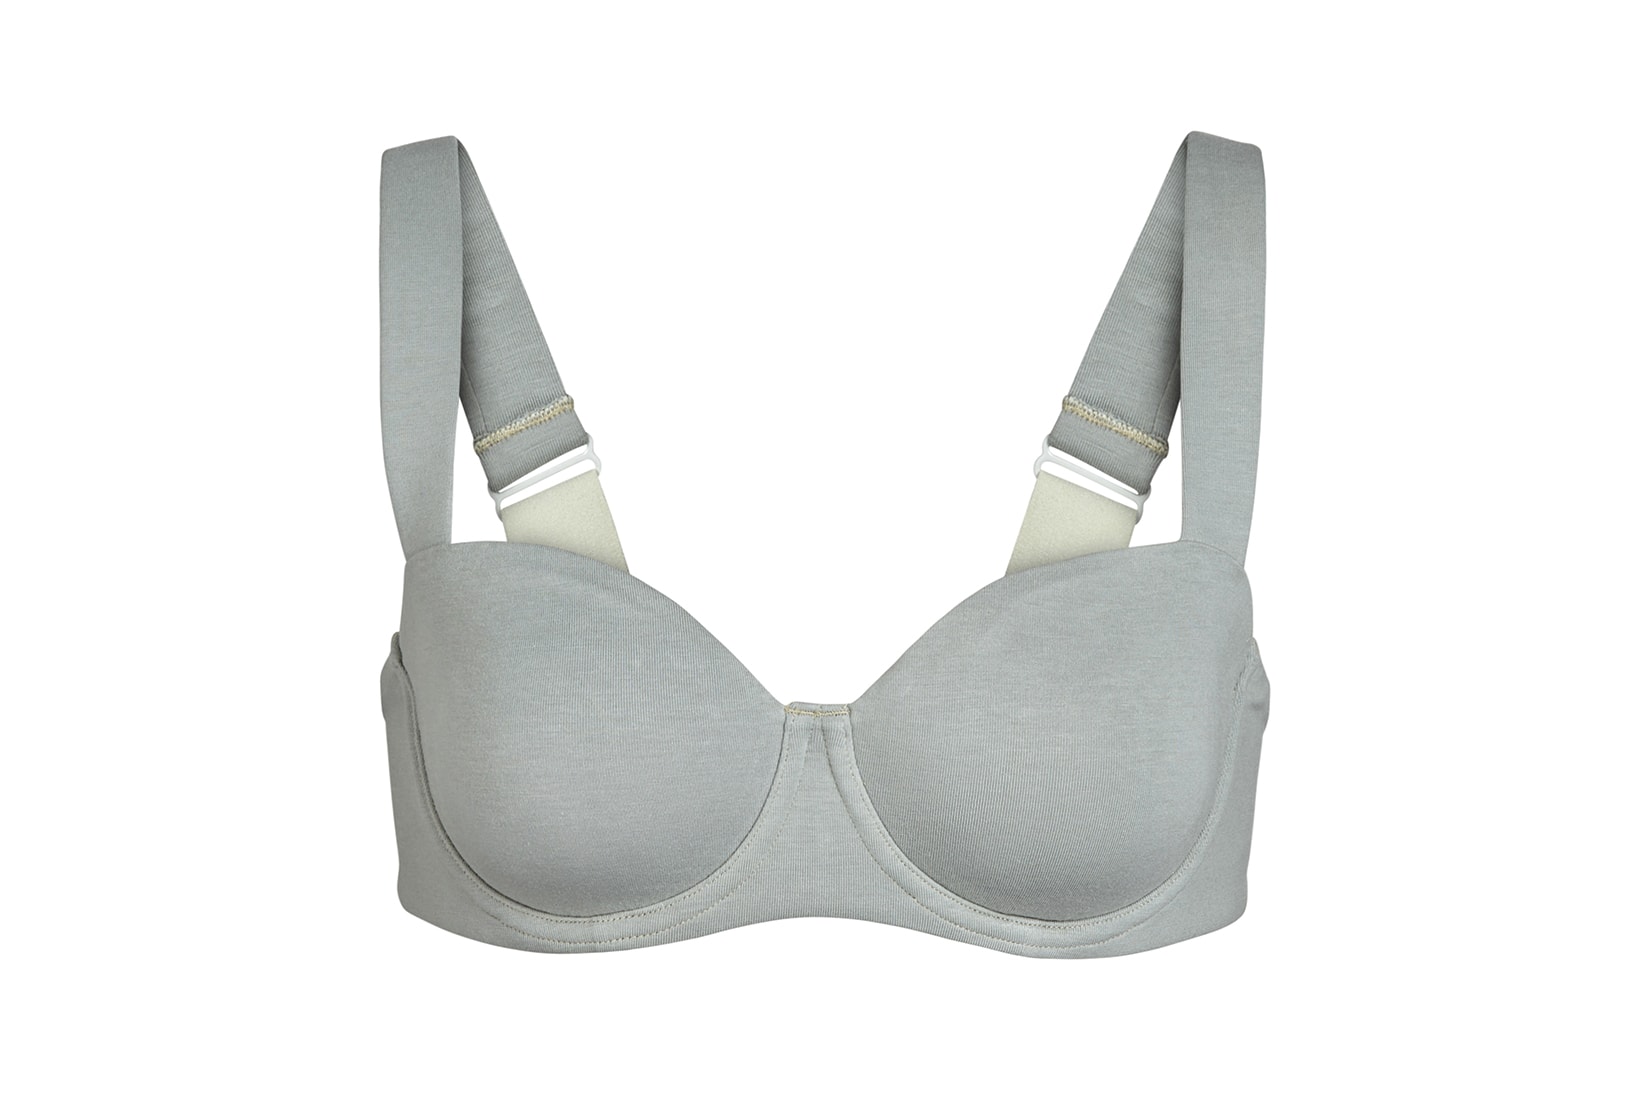 SKIMS - The Wide Strap Balconette Bra ($56) and the Dipped